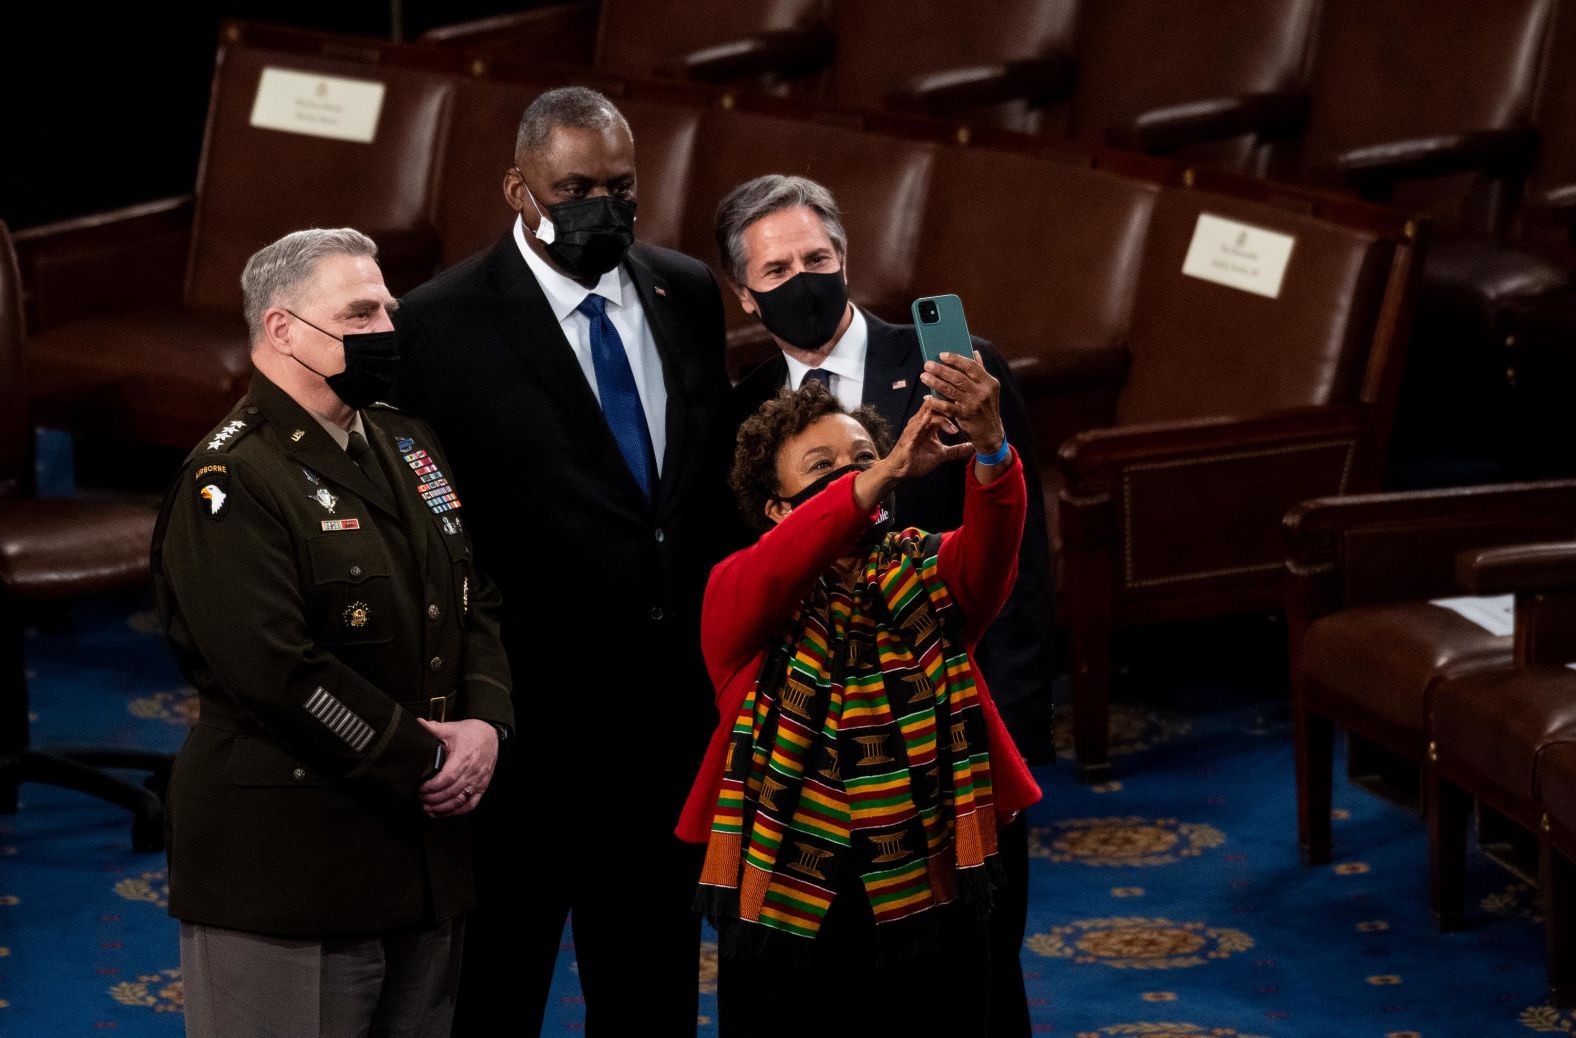 US Rep. Barbara Lee takes a selfie with, from left, Chairman of the Joint Chiefs of Staff Gen. Mark Milley, Secretary of Defense Lloyd Austin and Secretary of State Antony Blinken. Austin and Blinken were the only Cabinet members in attendance.